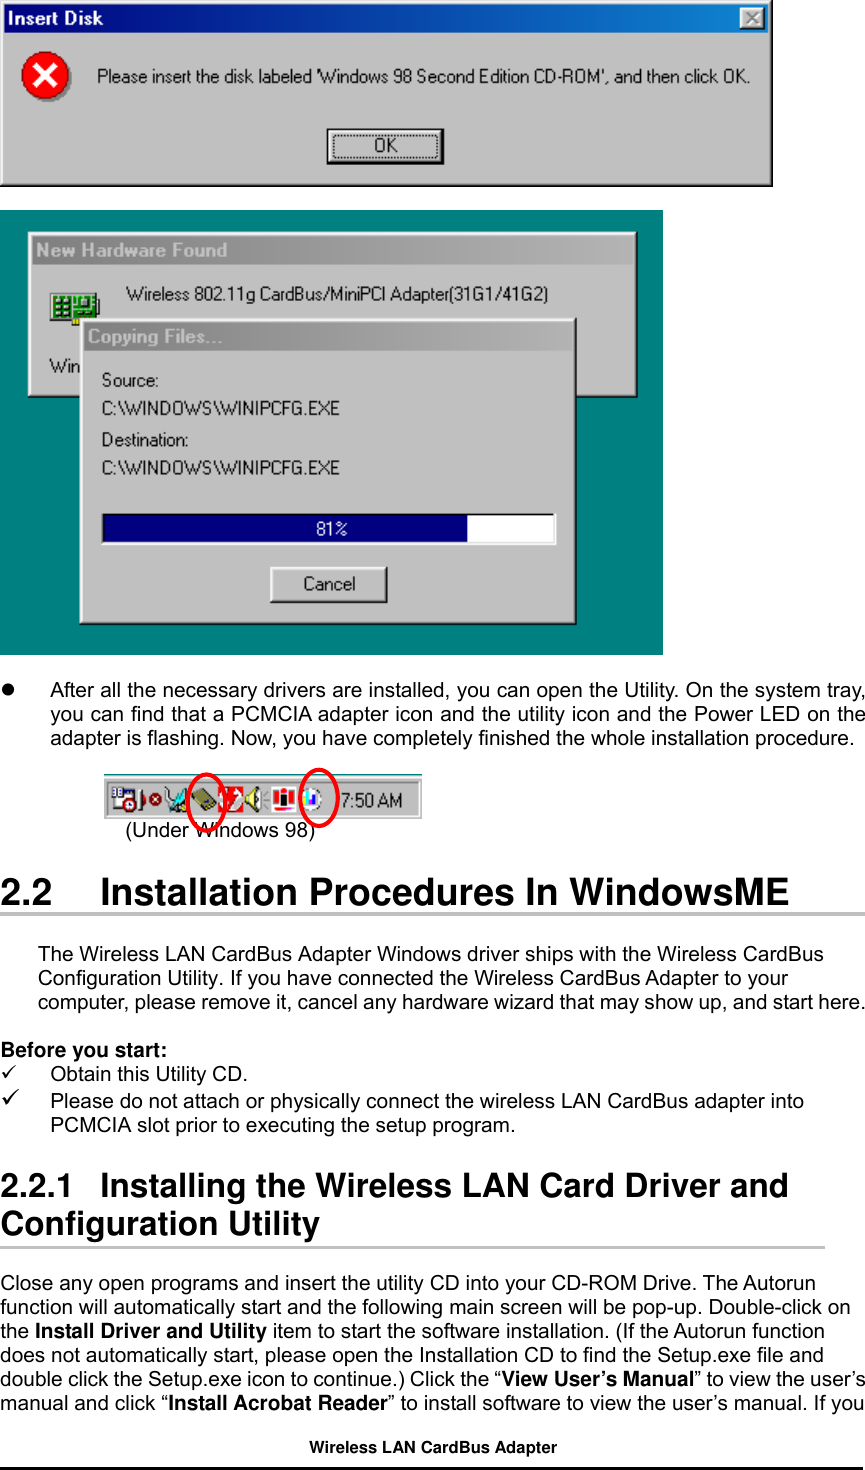       After all the necessary drivers are installed, you can open the Utility. On the system tray, you can find that a PCMCIA adapter icon and the utility icon and the Power LED on the adapter is flashing. Now, you have completely finished the whole installation procedure.                          (Under Windows 98)                       2.2  Installation Procedures In WindowsME  The Wireless LAN CardBus Adapter Windows driver ships with the Wireless CardBus Configuration Utility. If you have connected the Wireless CardBus Adapter to your computer, please remove it, cancel any hardware wizard that may show up, and start here.  Before you start:   Obtain this Utility CD.   Please do not attach or physically connect the wireless LAN CardBus adapter into PCMCIA slot prior to executing the setup program.    2.2.1   Installing the Wireless LAN Card Driver and Configuration Utility  Close any open programs and insert the utility CD into your CD-ROM Drive. The Autorun function will automatically start and the following main screen will be pop-up. Double-click on the Install Driver and Utility item to start the software installation. (If the Autorun function does not automatically start, please open the Installation CD to find the Setup.exe file and double click the Setup.exe icon to continue.) Click the “View User’s Manual” to view the user’s manual and click “Install Acrobat Reader” to install software to view the user’s manual. If you Wireless LAN CardBus Adapter 